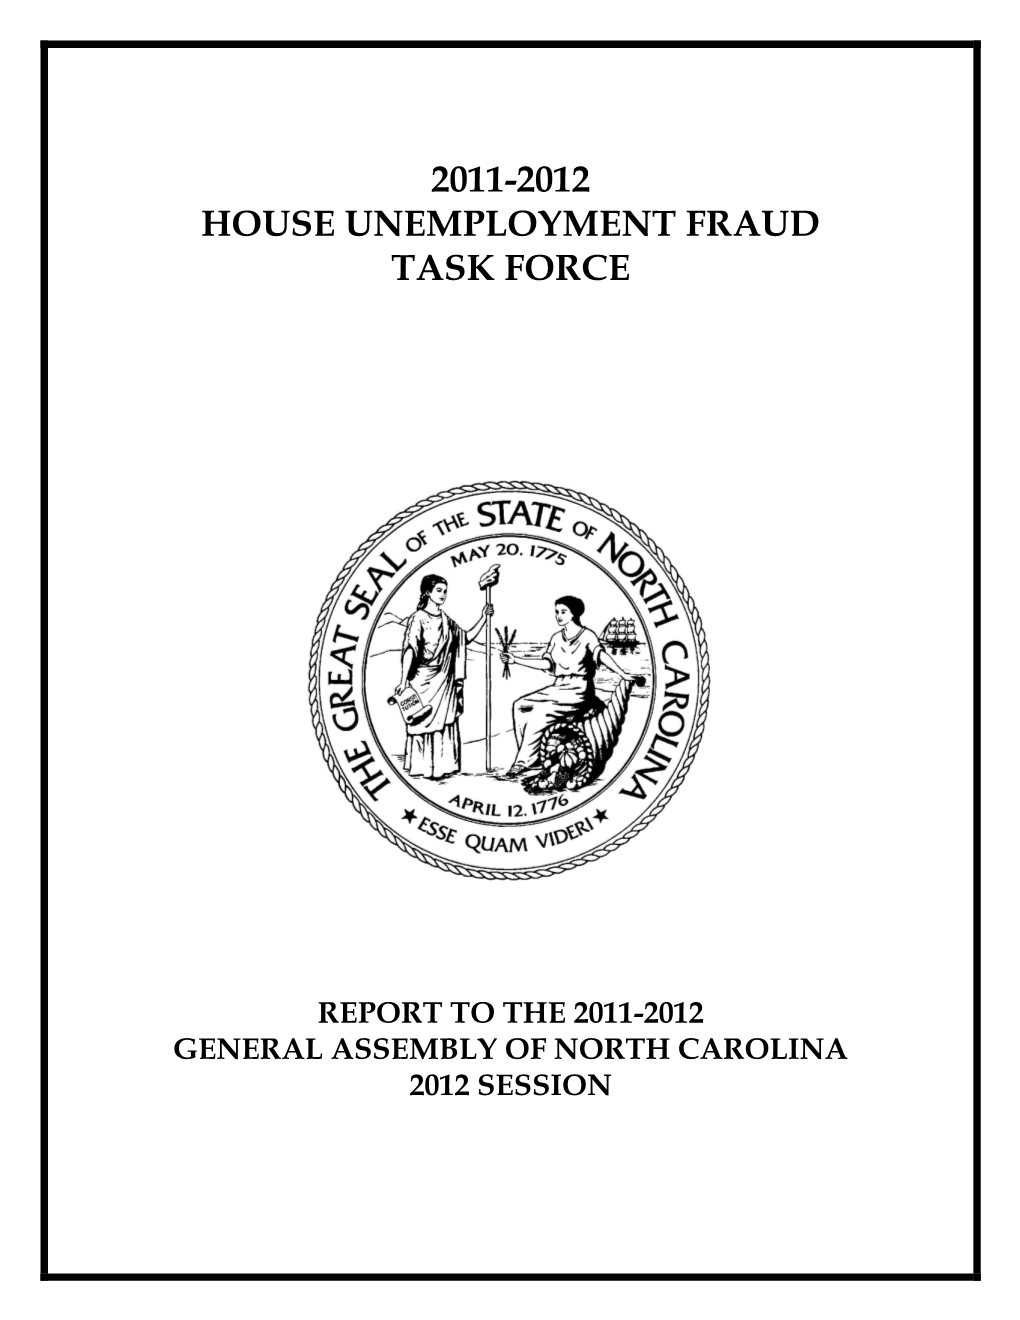 2011-2012 House Unemployment Fraud Task Force